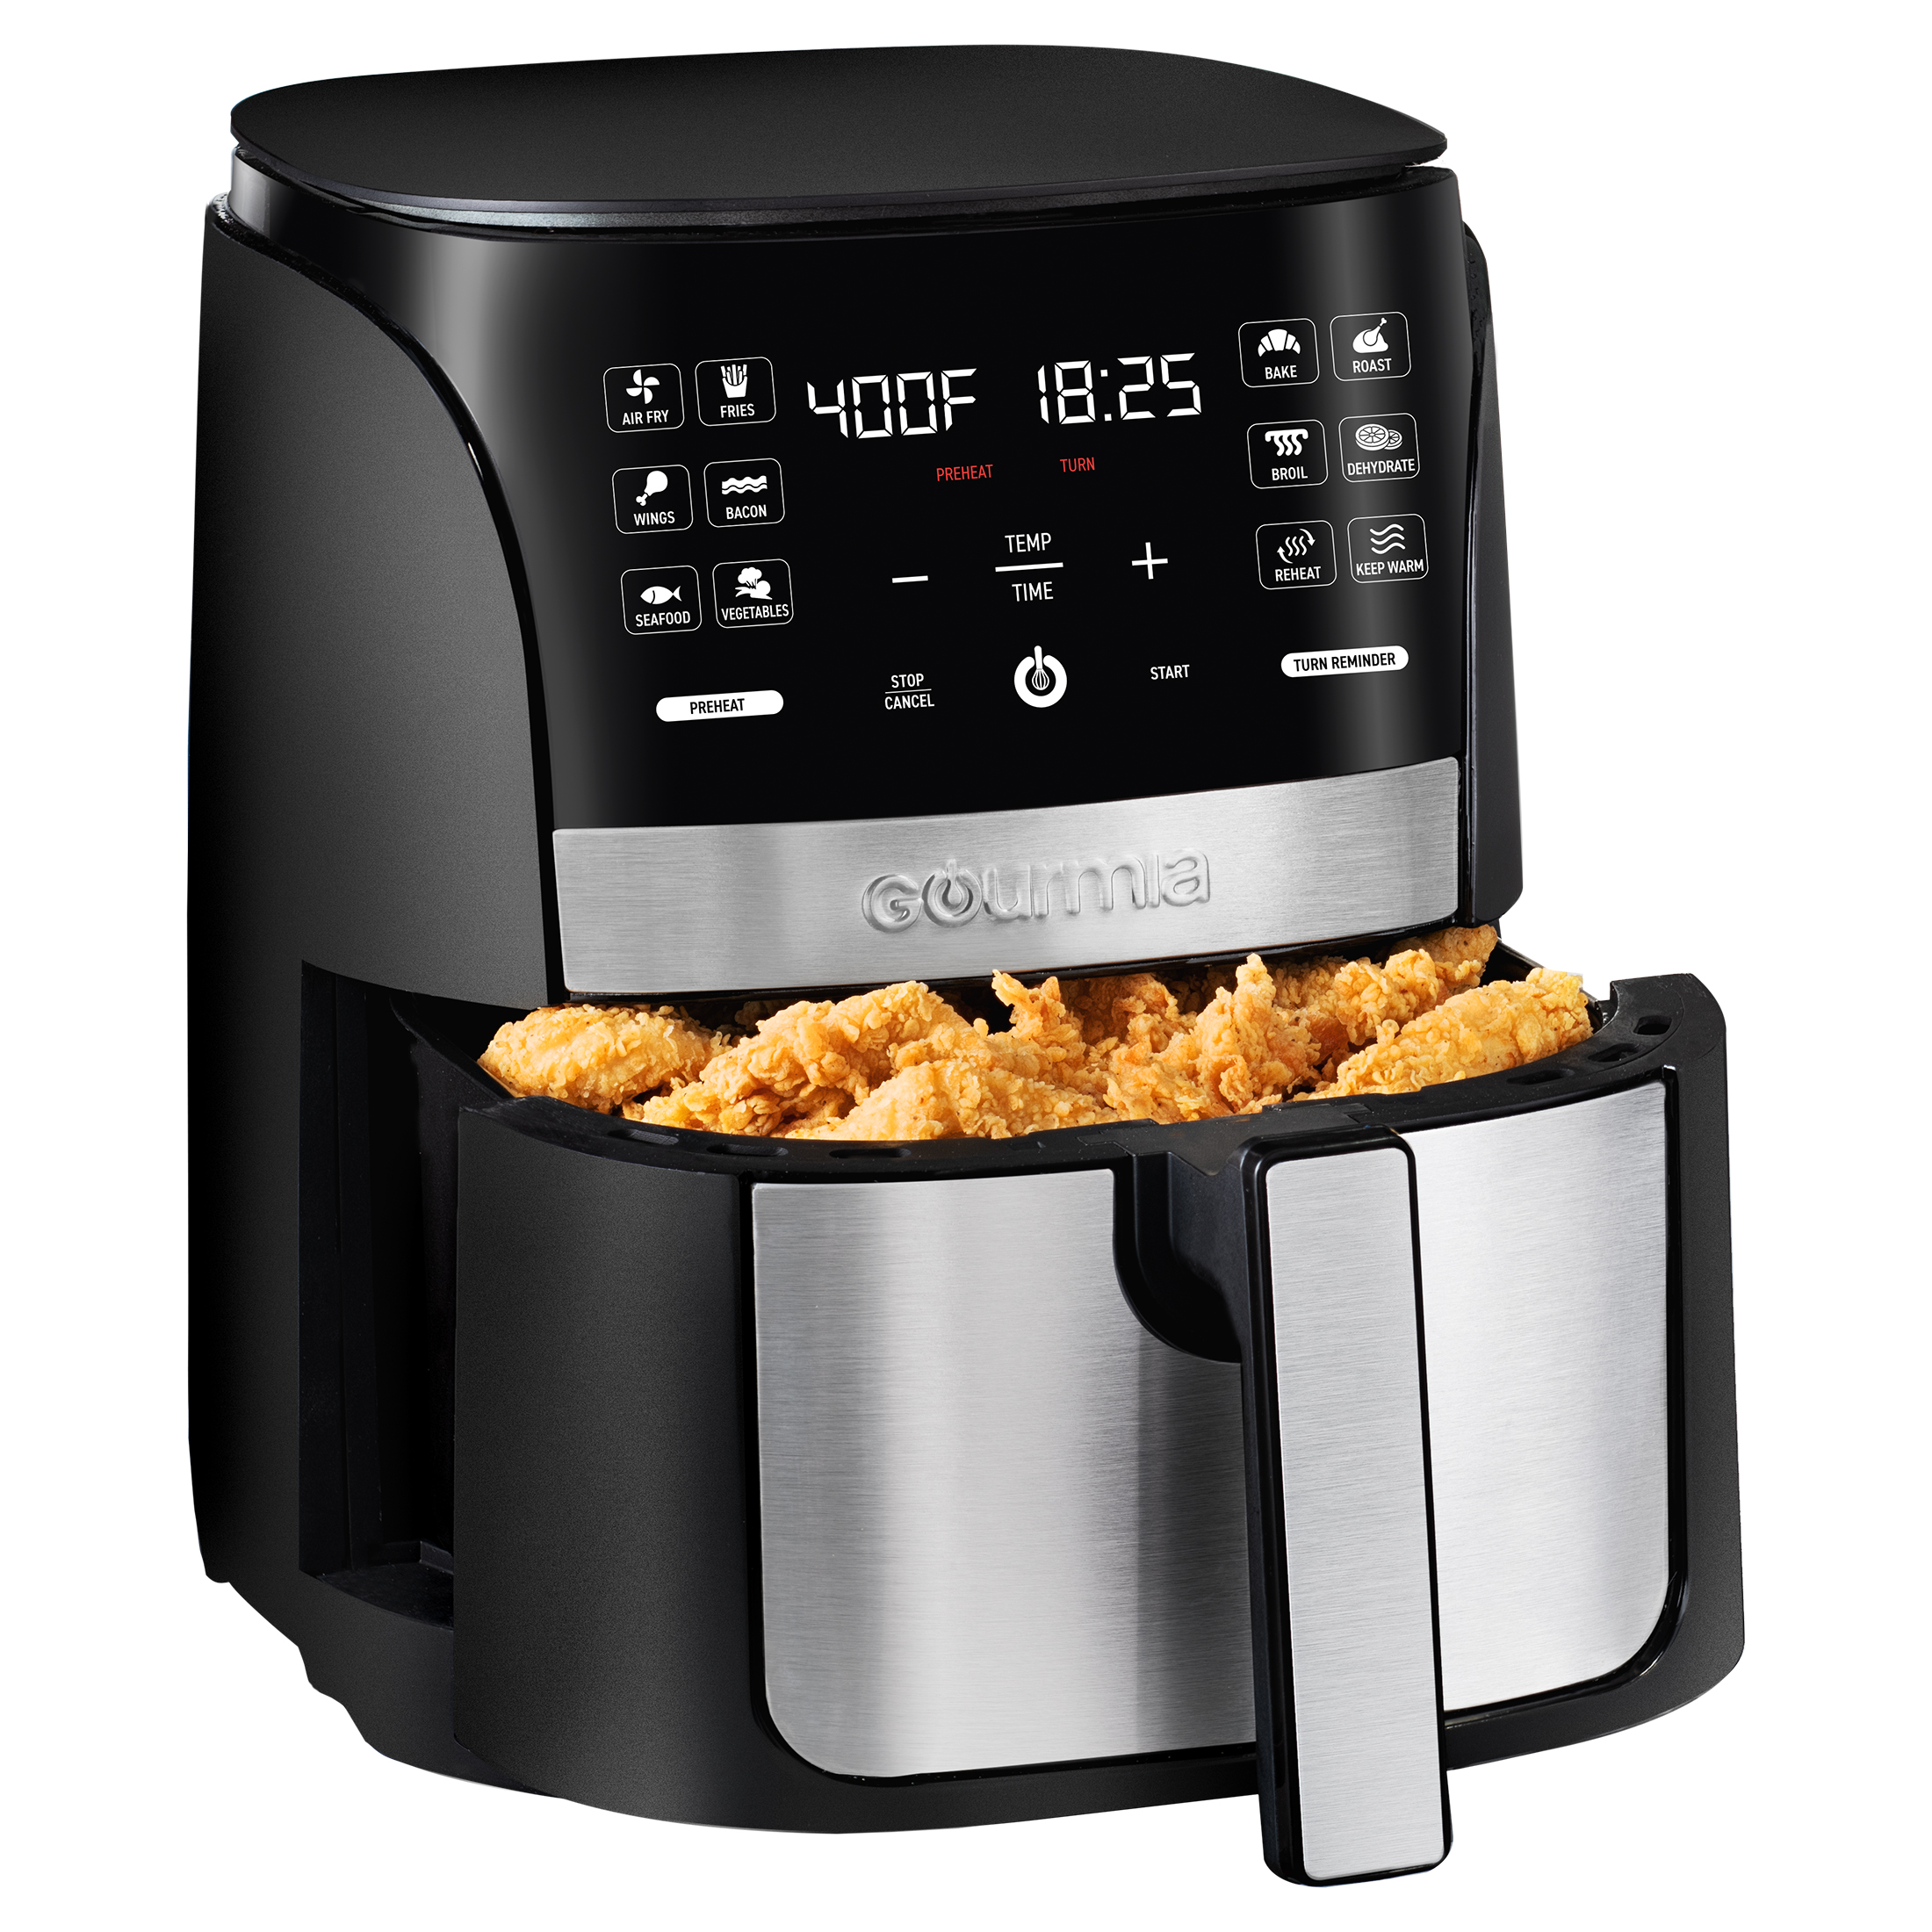 Gourmia 6 Qt Digital Air Fryer with Guided Cooking and 12 One-Touch Cooking Functions, 13.58 H, New - image 6 of 9